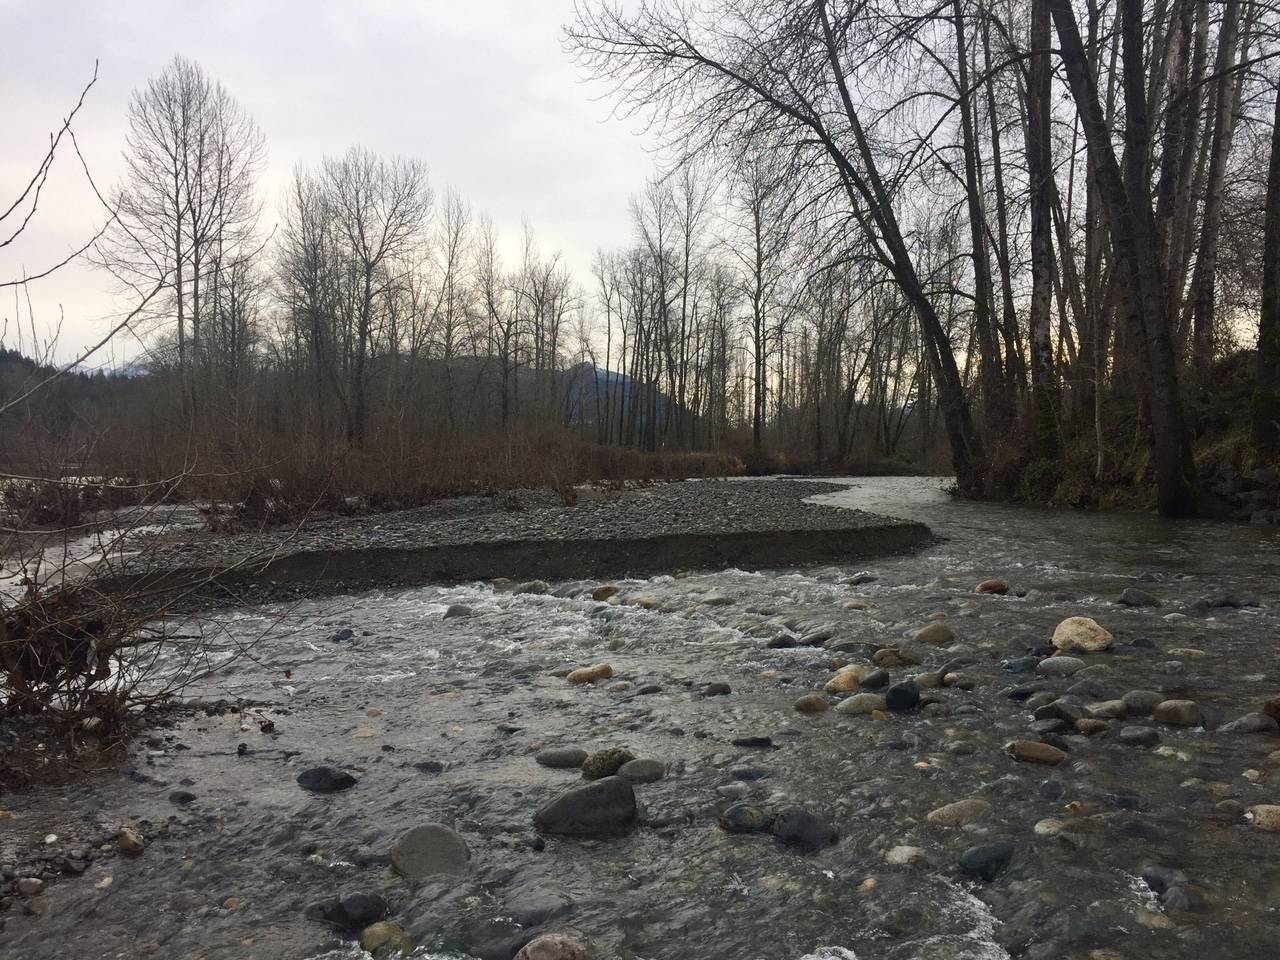 Mouth of the Raging River where it flows into the Snoqualmie River, just east of the Fall City Bridge, on the morning of Tuesday, Jan. 5, 2021. Photo by William Shaw